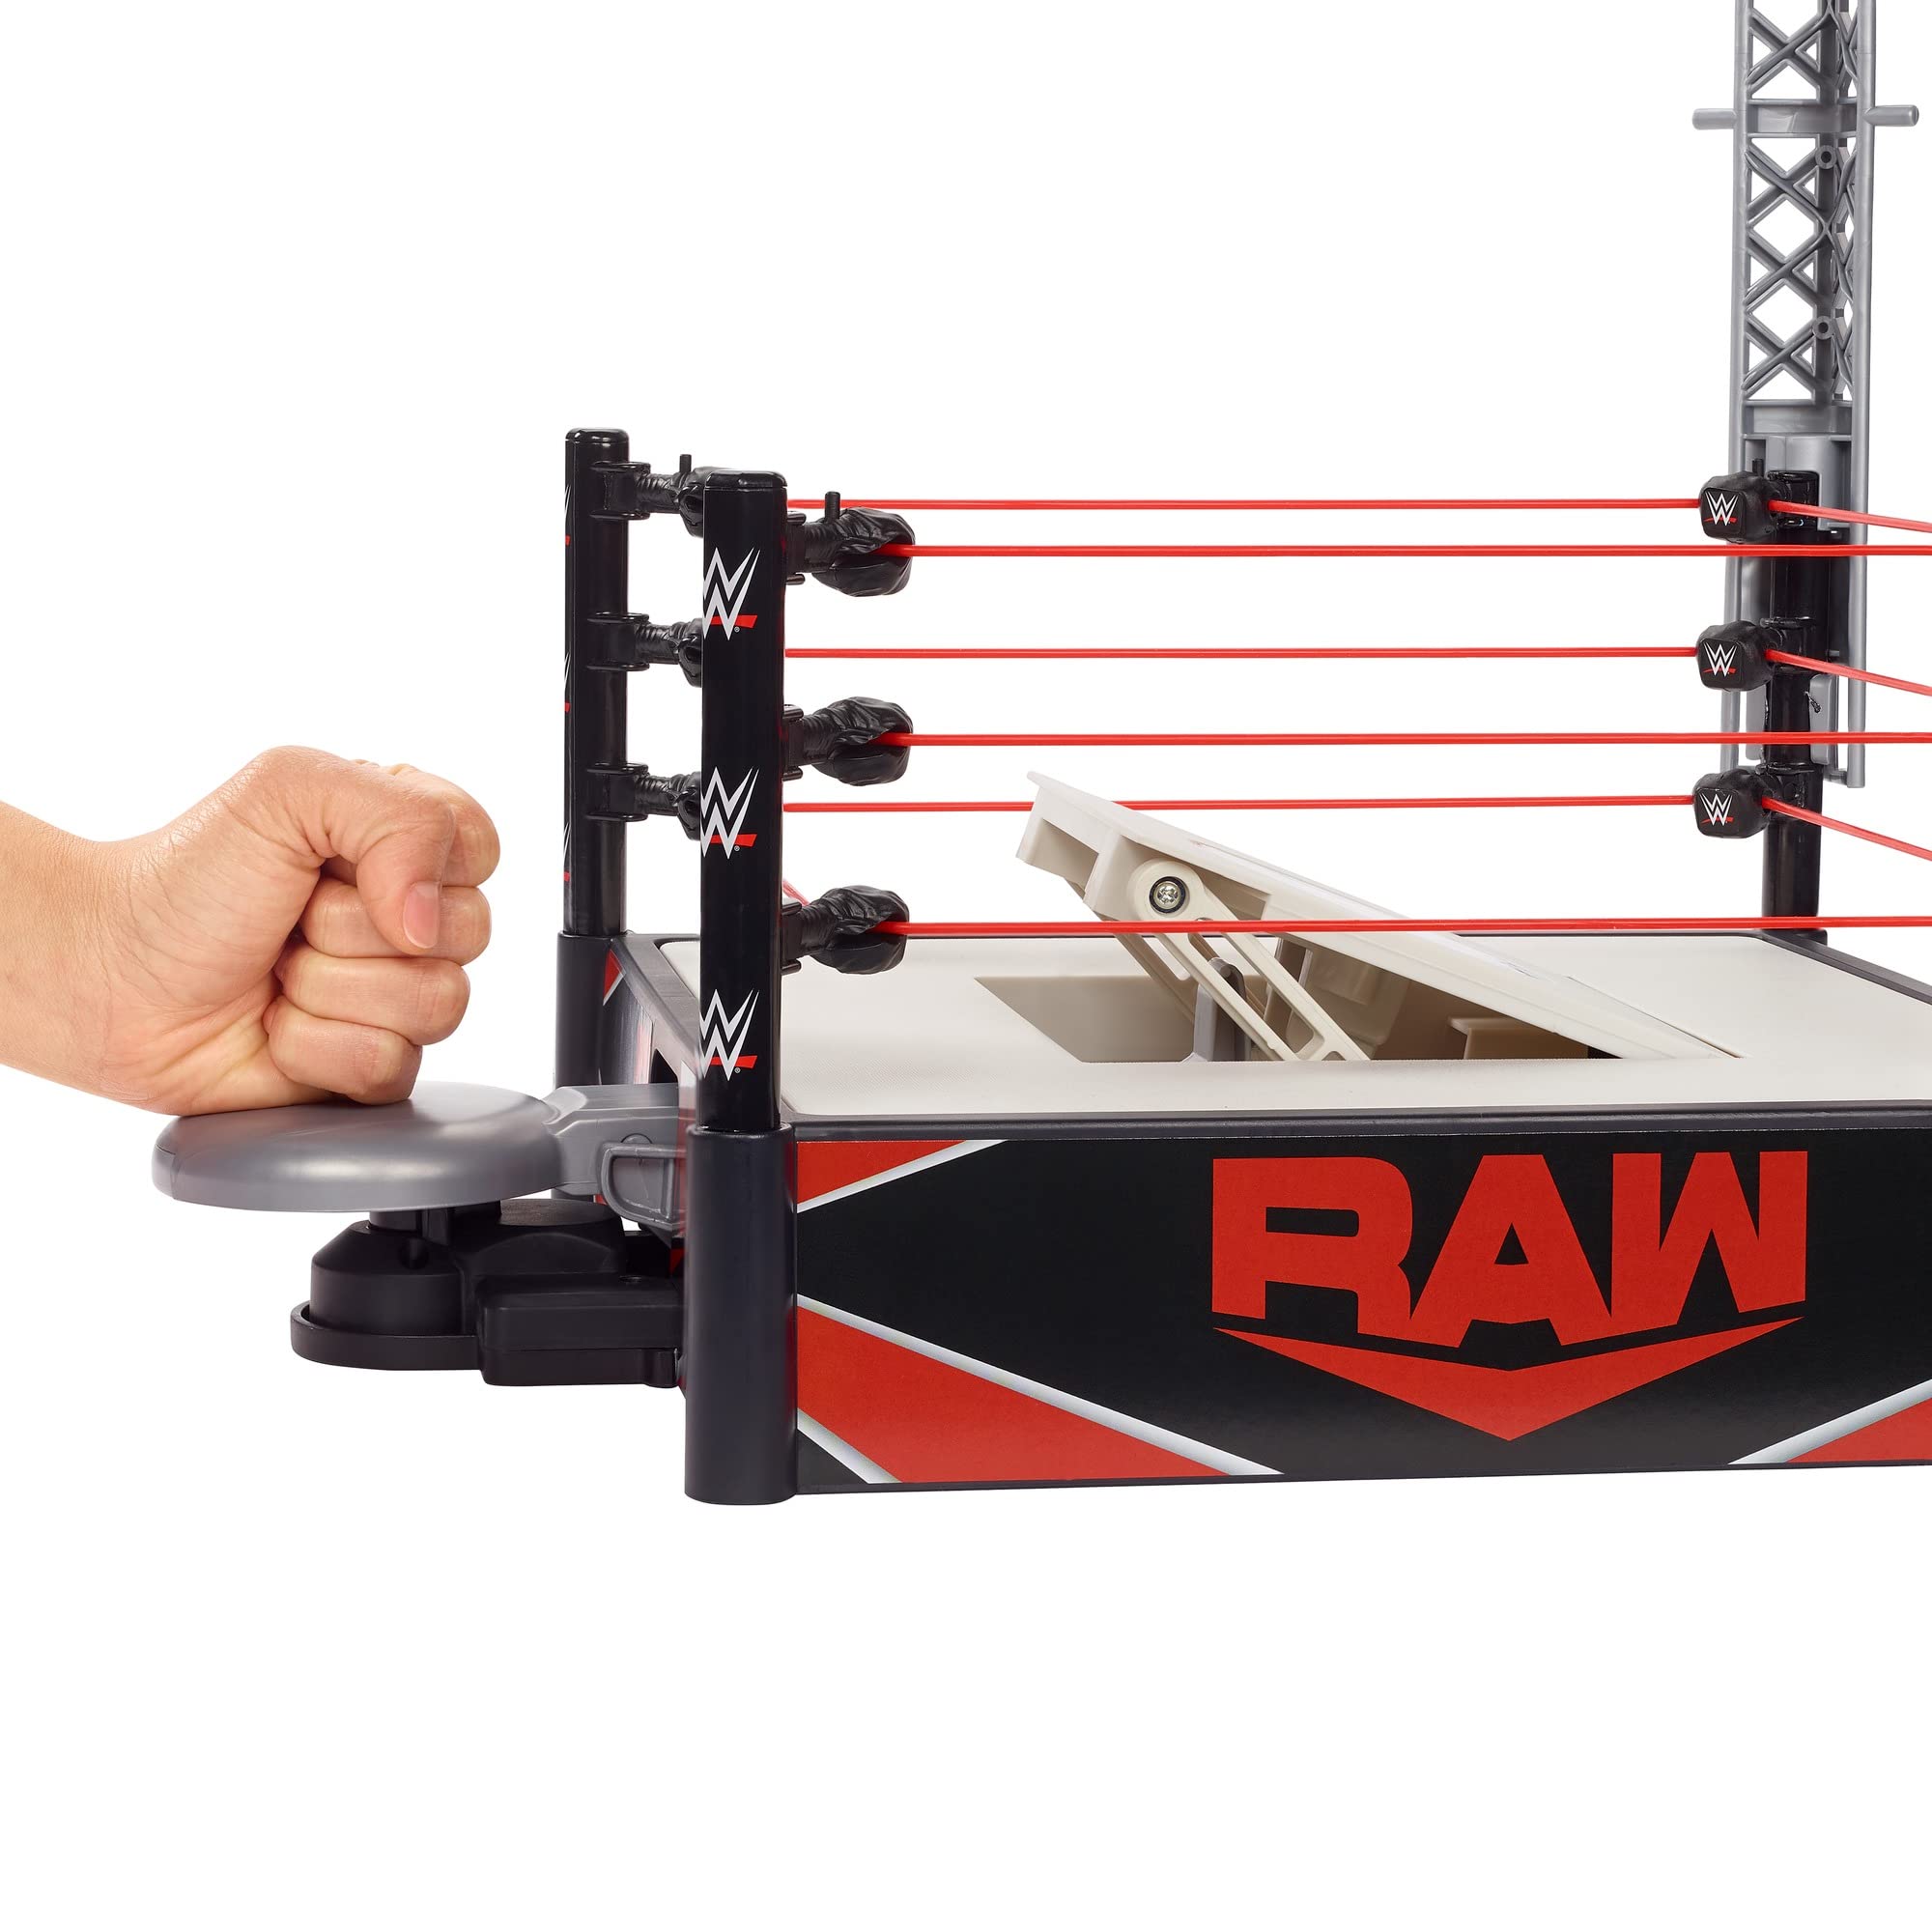 Mattel WWE Kickout Ring Wrekkin Playset with Randomized Ring Count, Springboard Launcher, Crane, WWE Championship & Accessories, 13-Inch X 20-Inch Ring, Multicolor